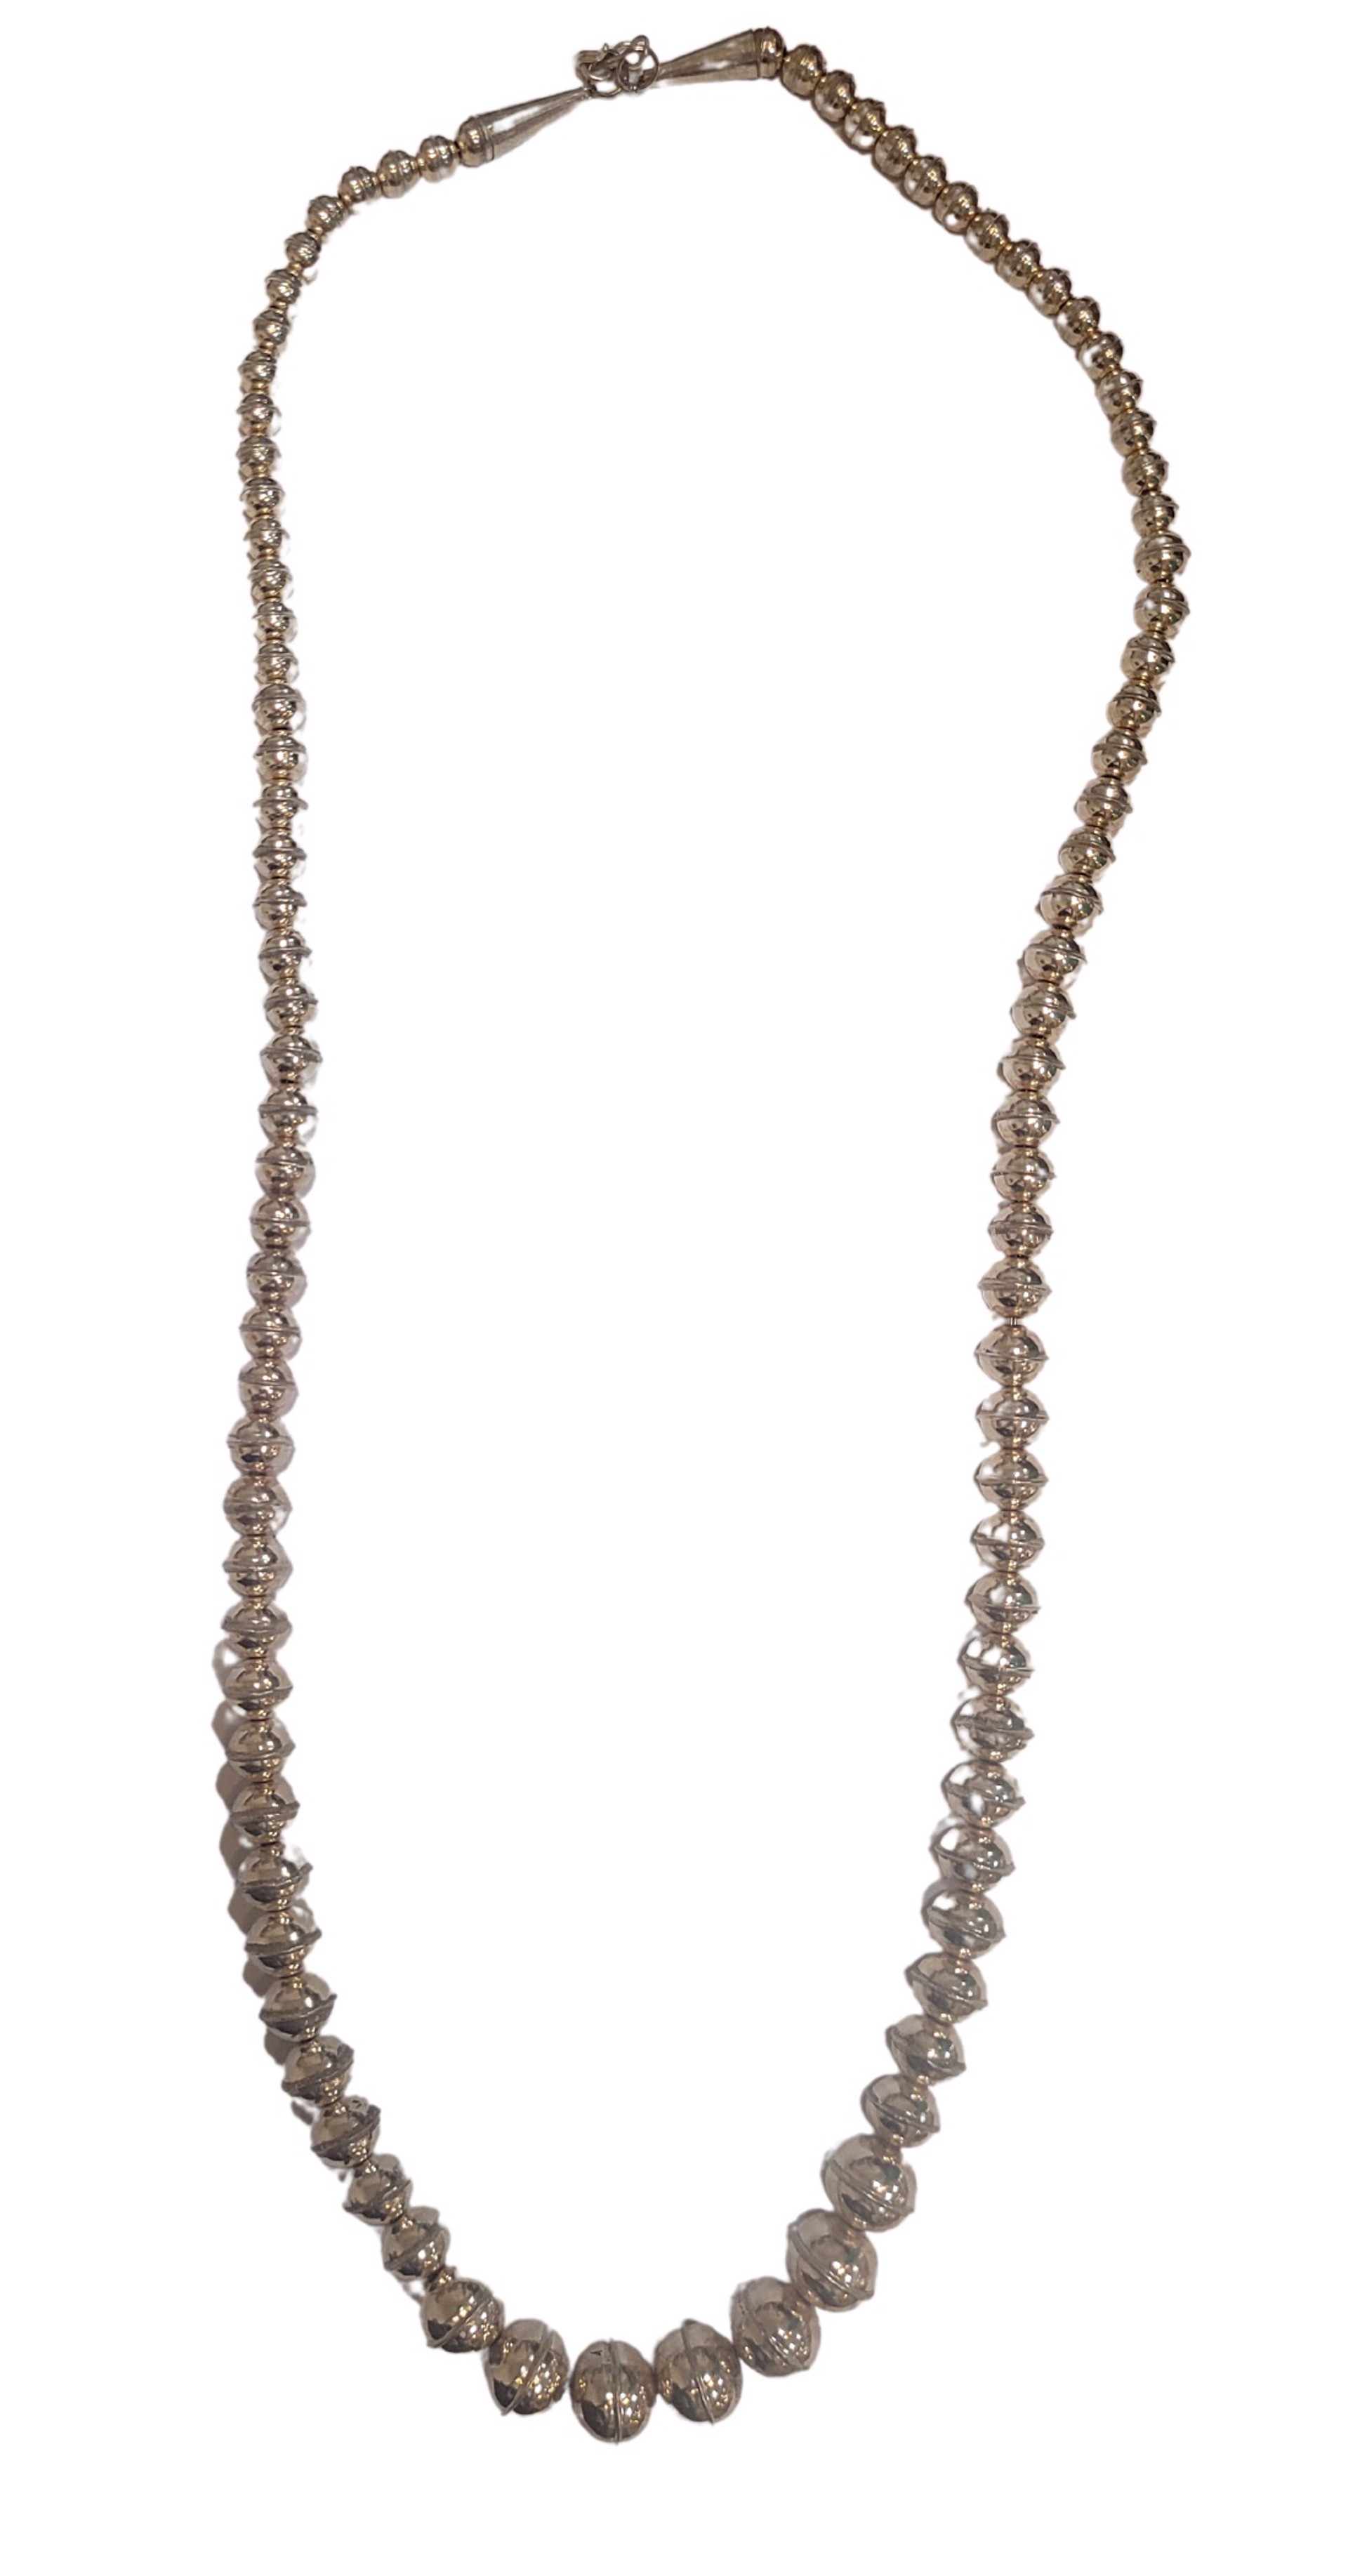 Graduated Silver Bead Necklace - Bench Made